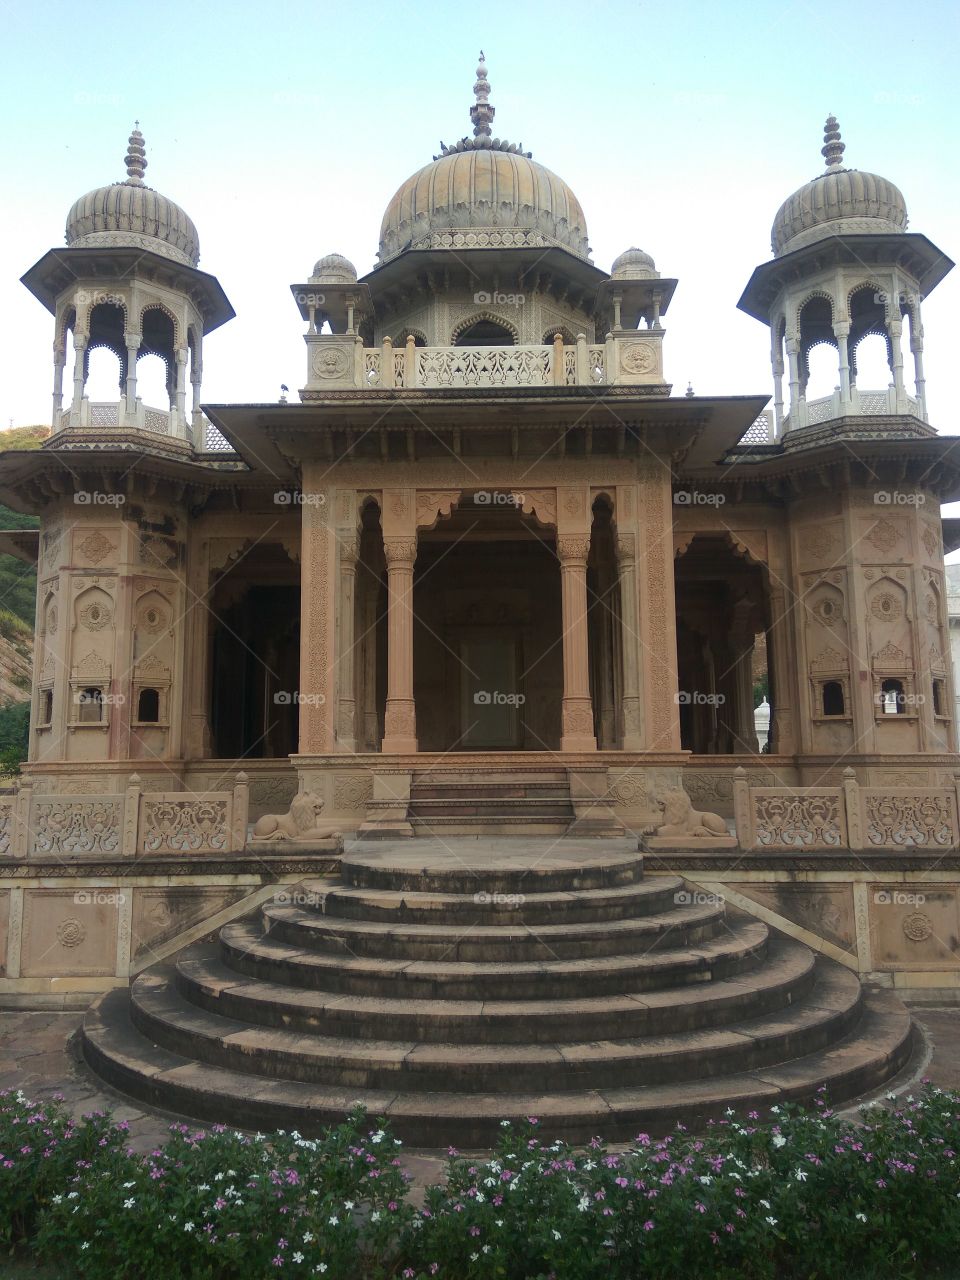 Gaitore, the royal cremation ground of the Kachhwaha Rajputs, was chosen as the designated place by Maharaja Sawai Jai Singh II, the founder of Jaipur, after he shifted the capital to the city. From 1733, the cremation of every Kachhwaha king was done here. The only cenotaph which is missing from here is the one of Maharaja Sawai Ishwari Singh whose cremation was done in the city palace complex in Jaipur.